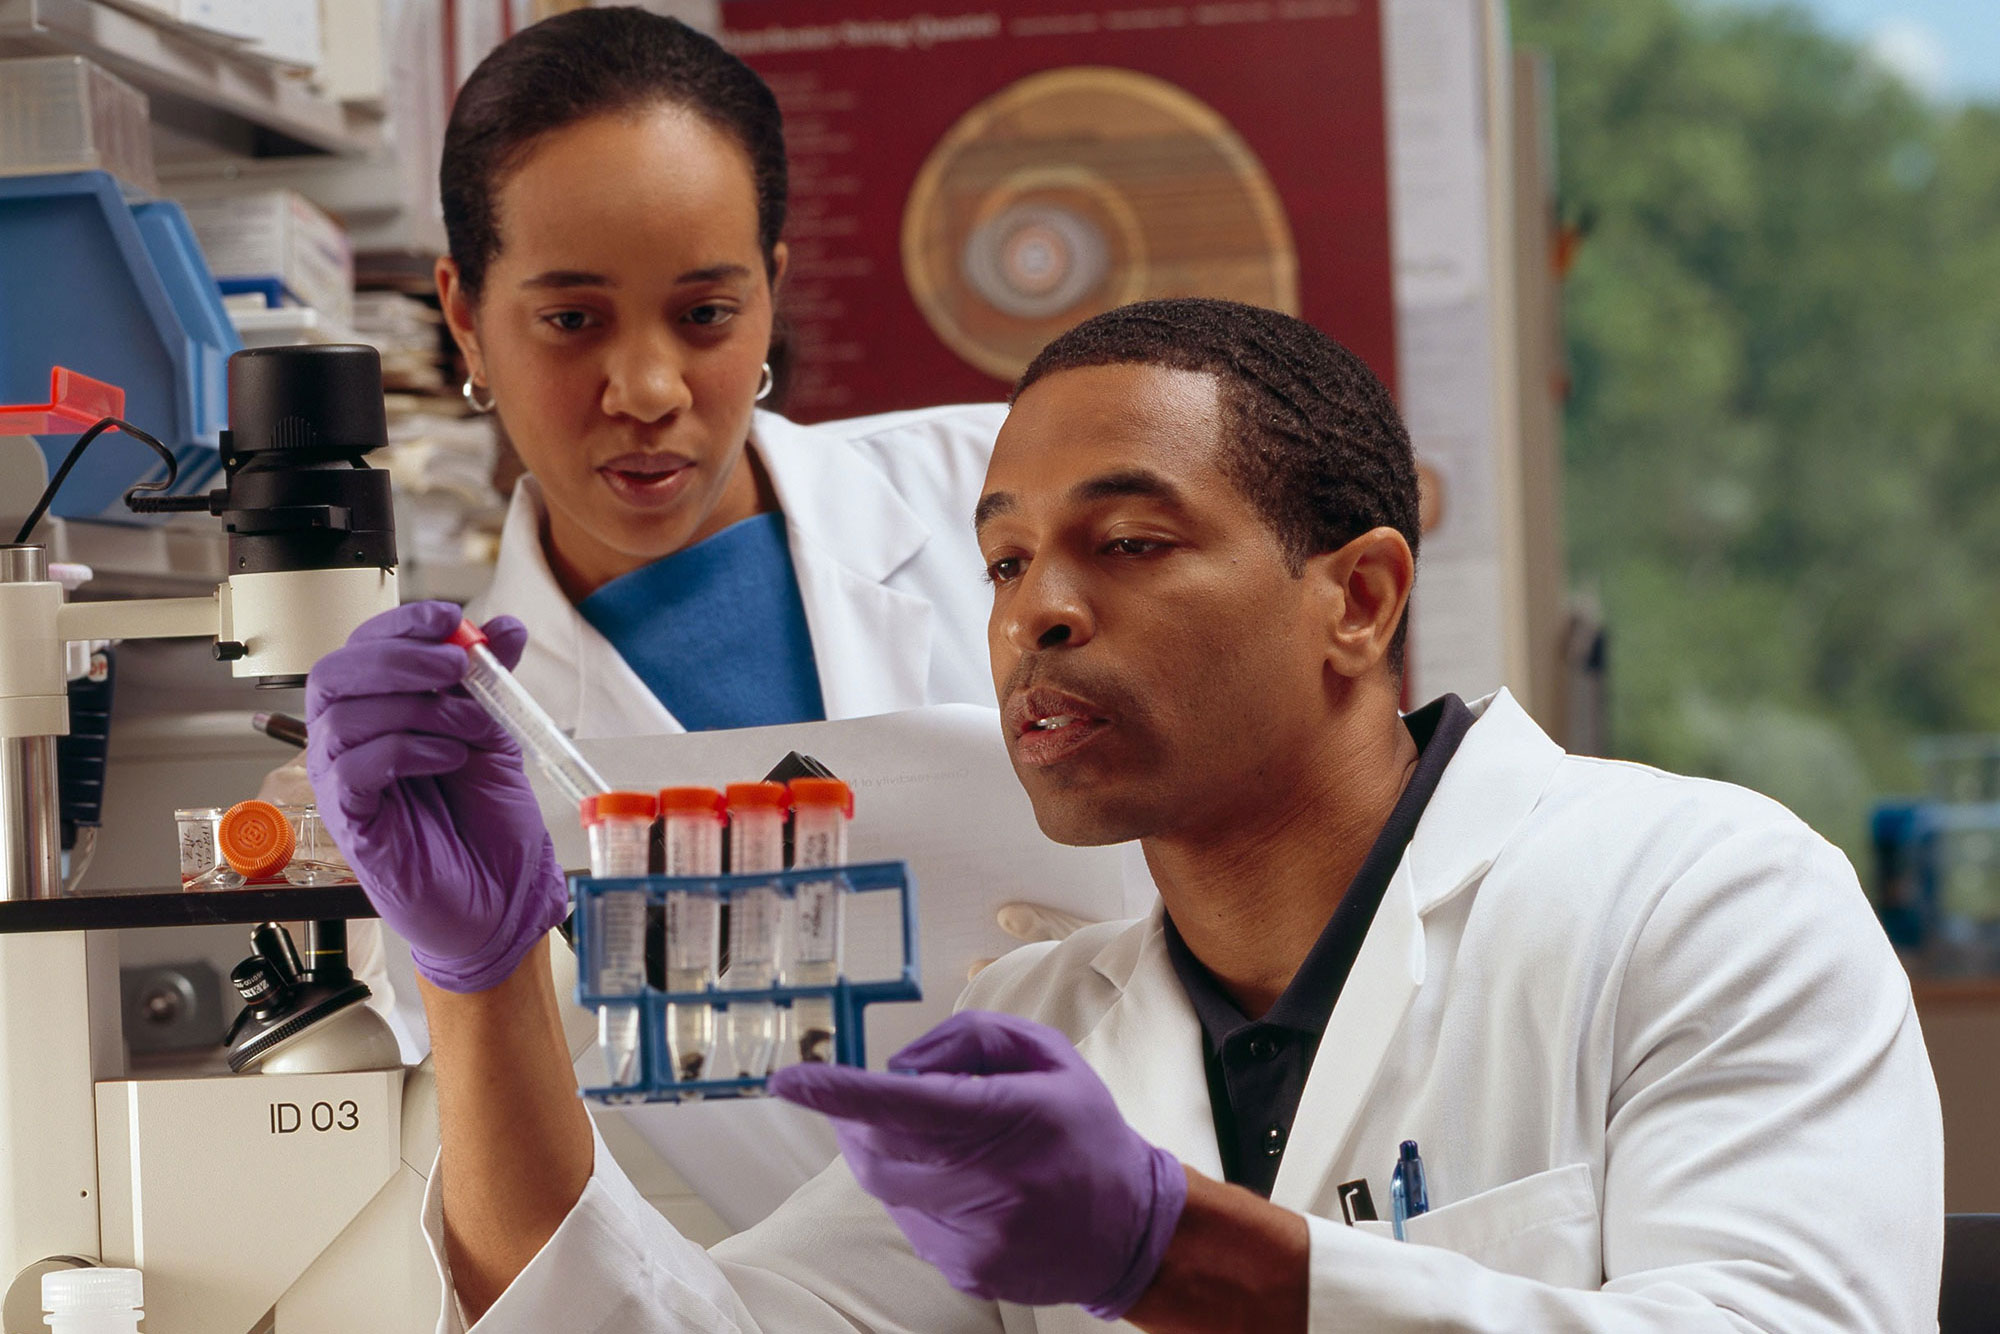 black woman and man in lab coats looking at test samples in lab